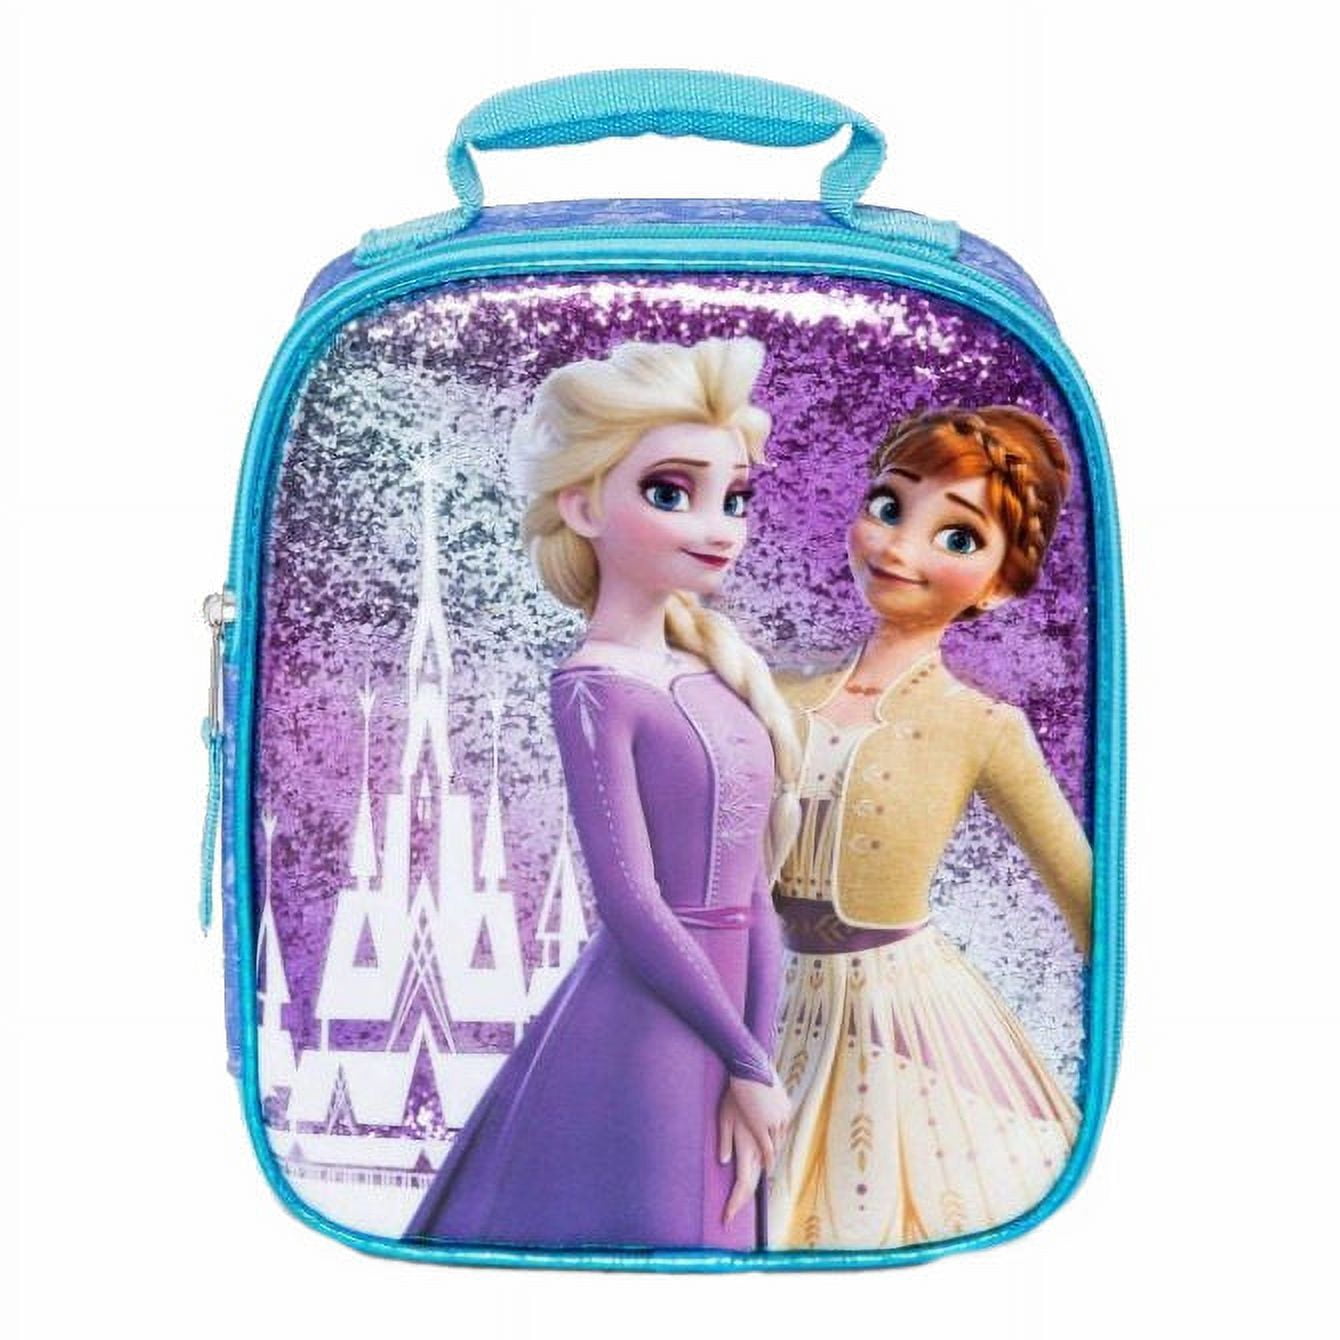 Cerda group Frozen 2 Lunch Bag With Accessories Blue